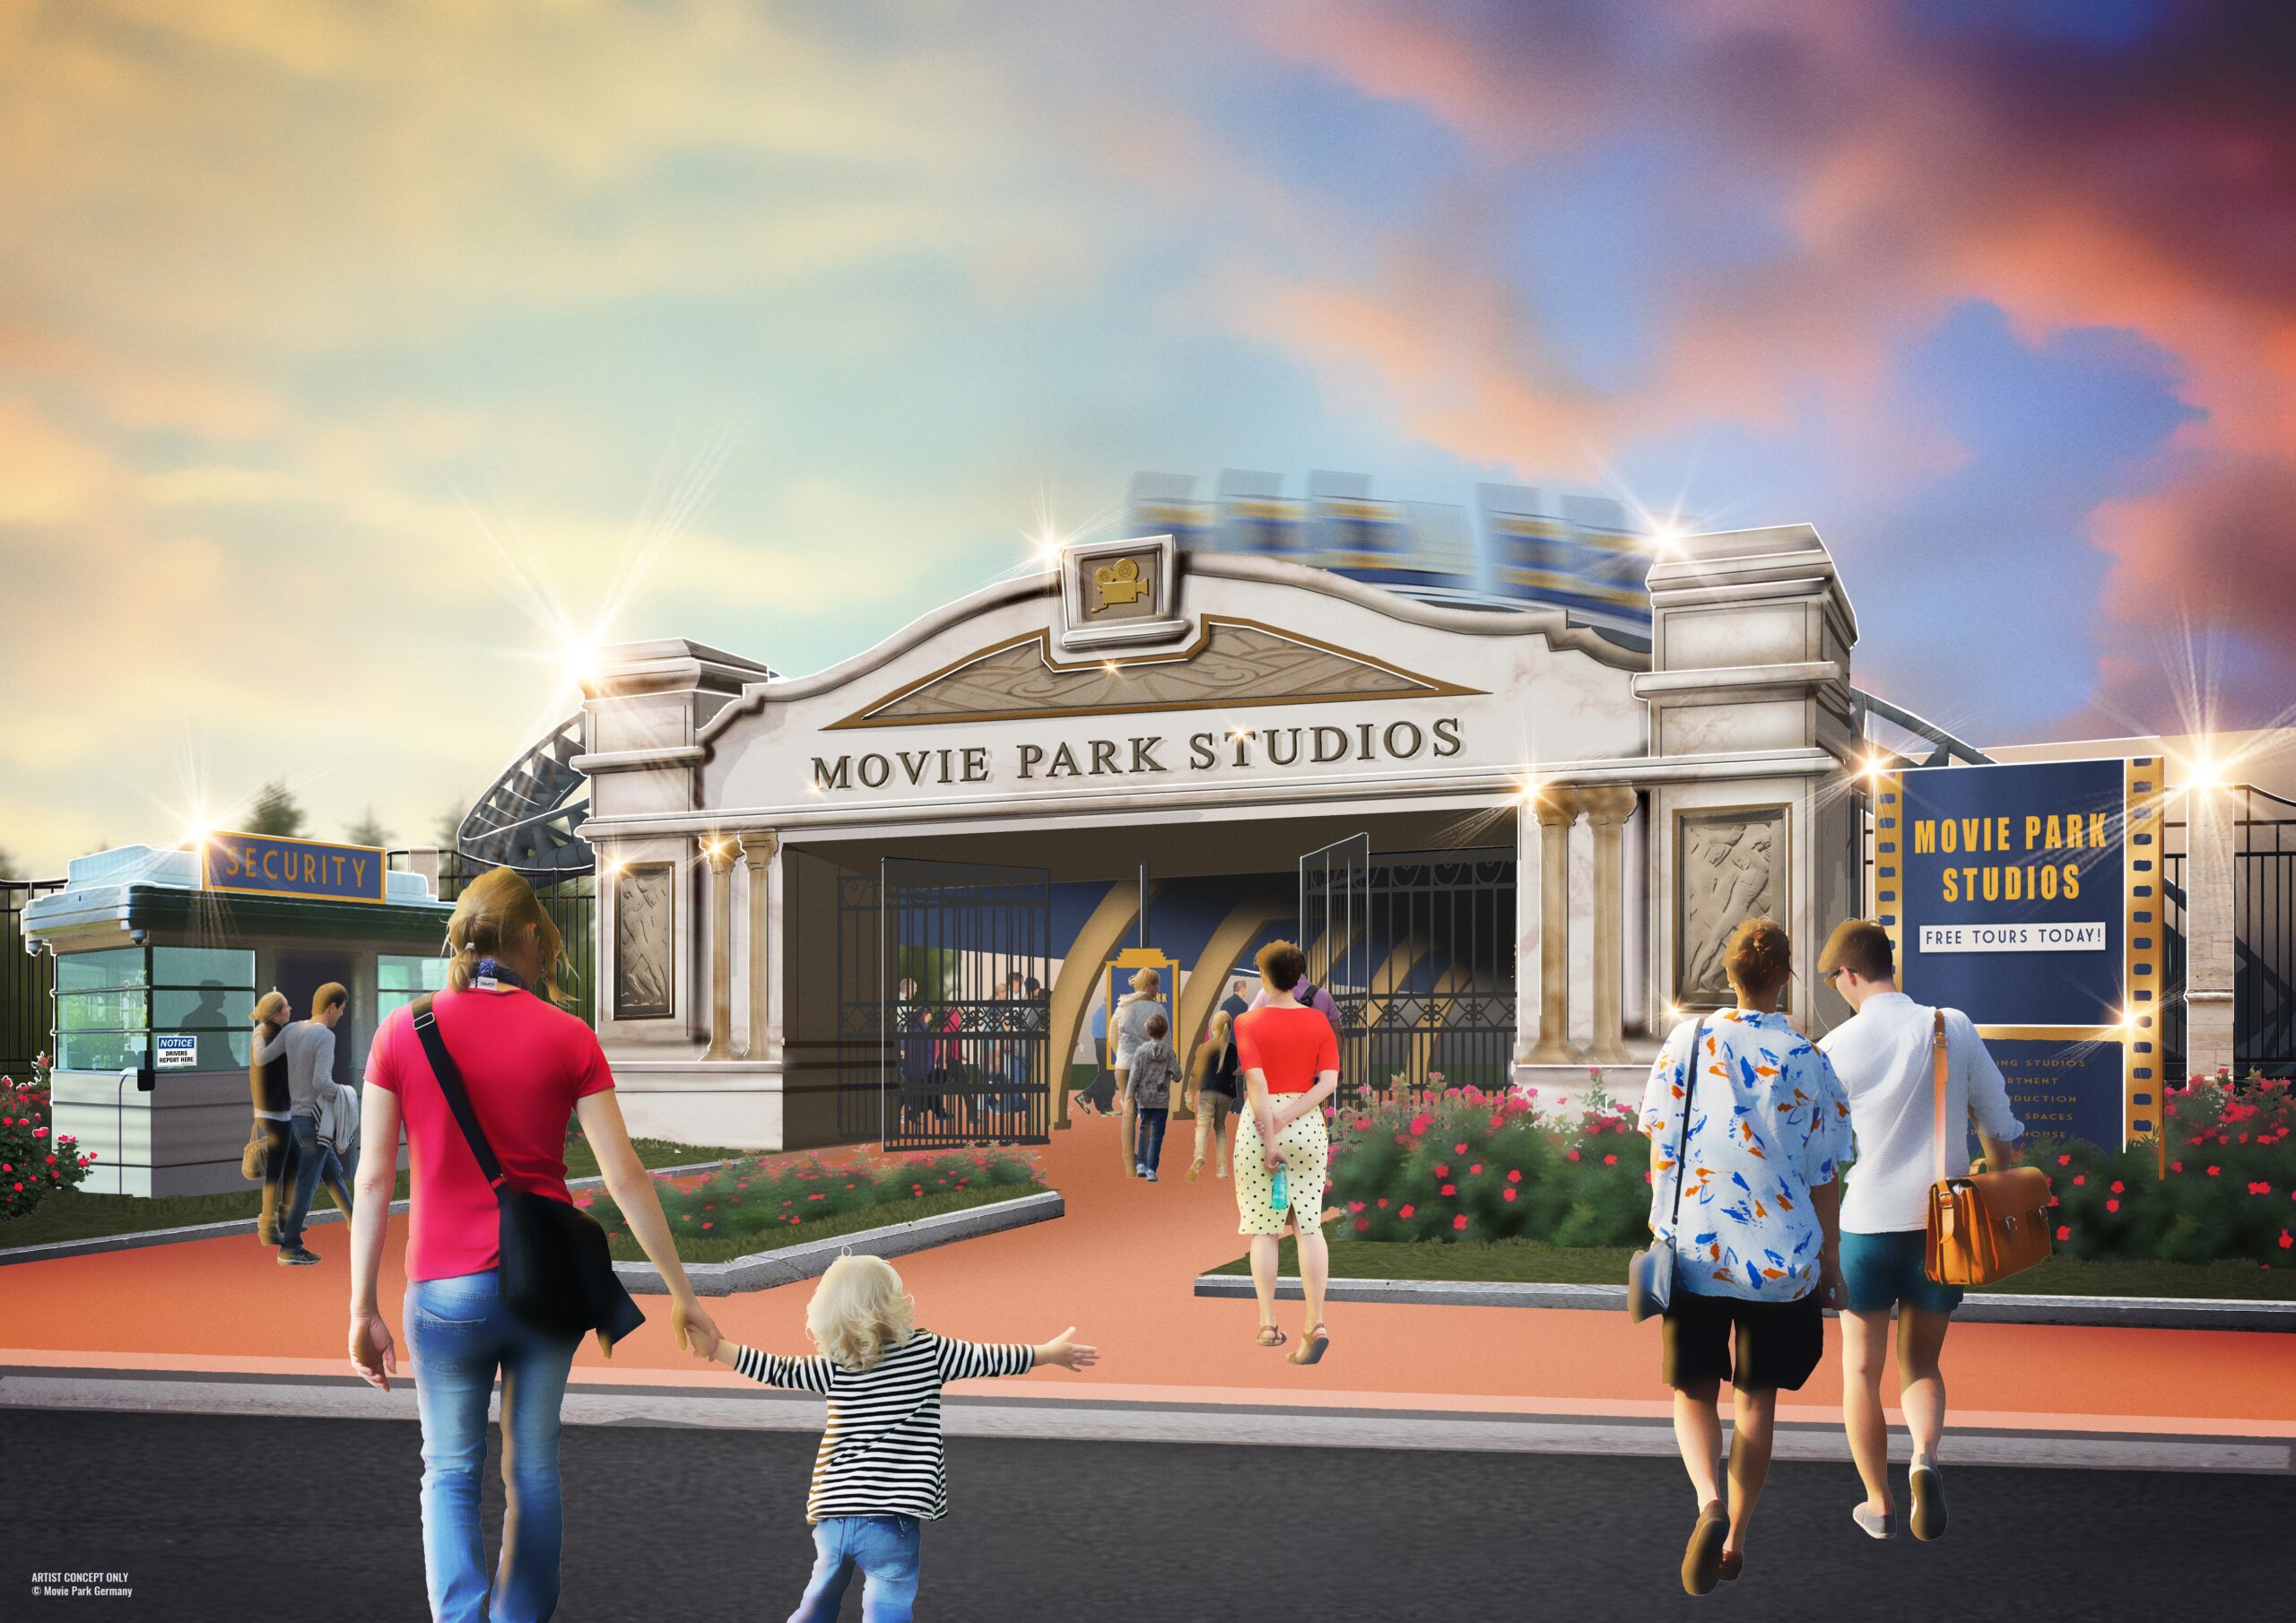 “welcome To The Movie Park Studios” Storyline And Theme Of The New